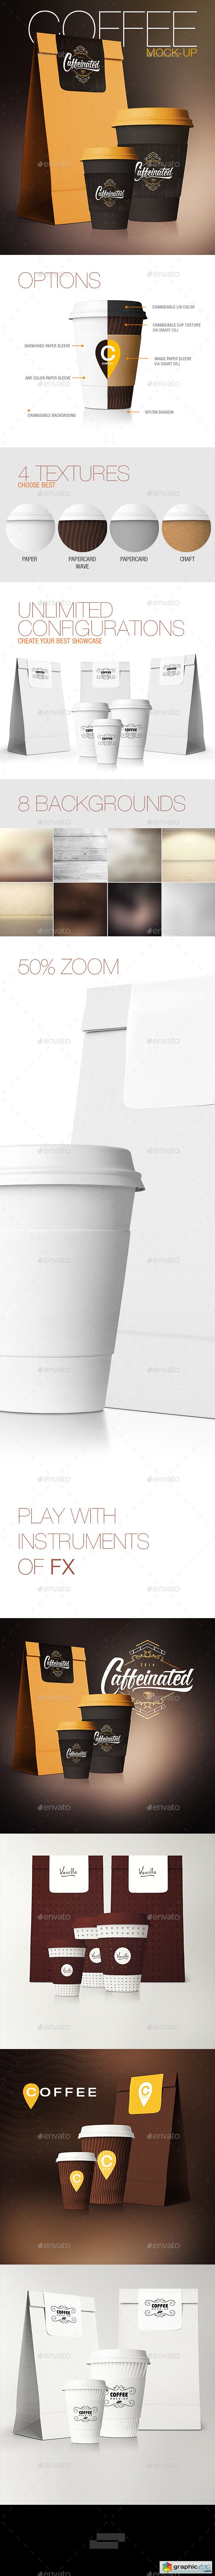 Coffee Cup / Coffee Package Mock-Up